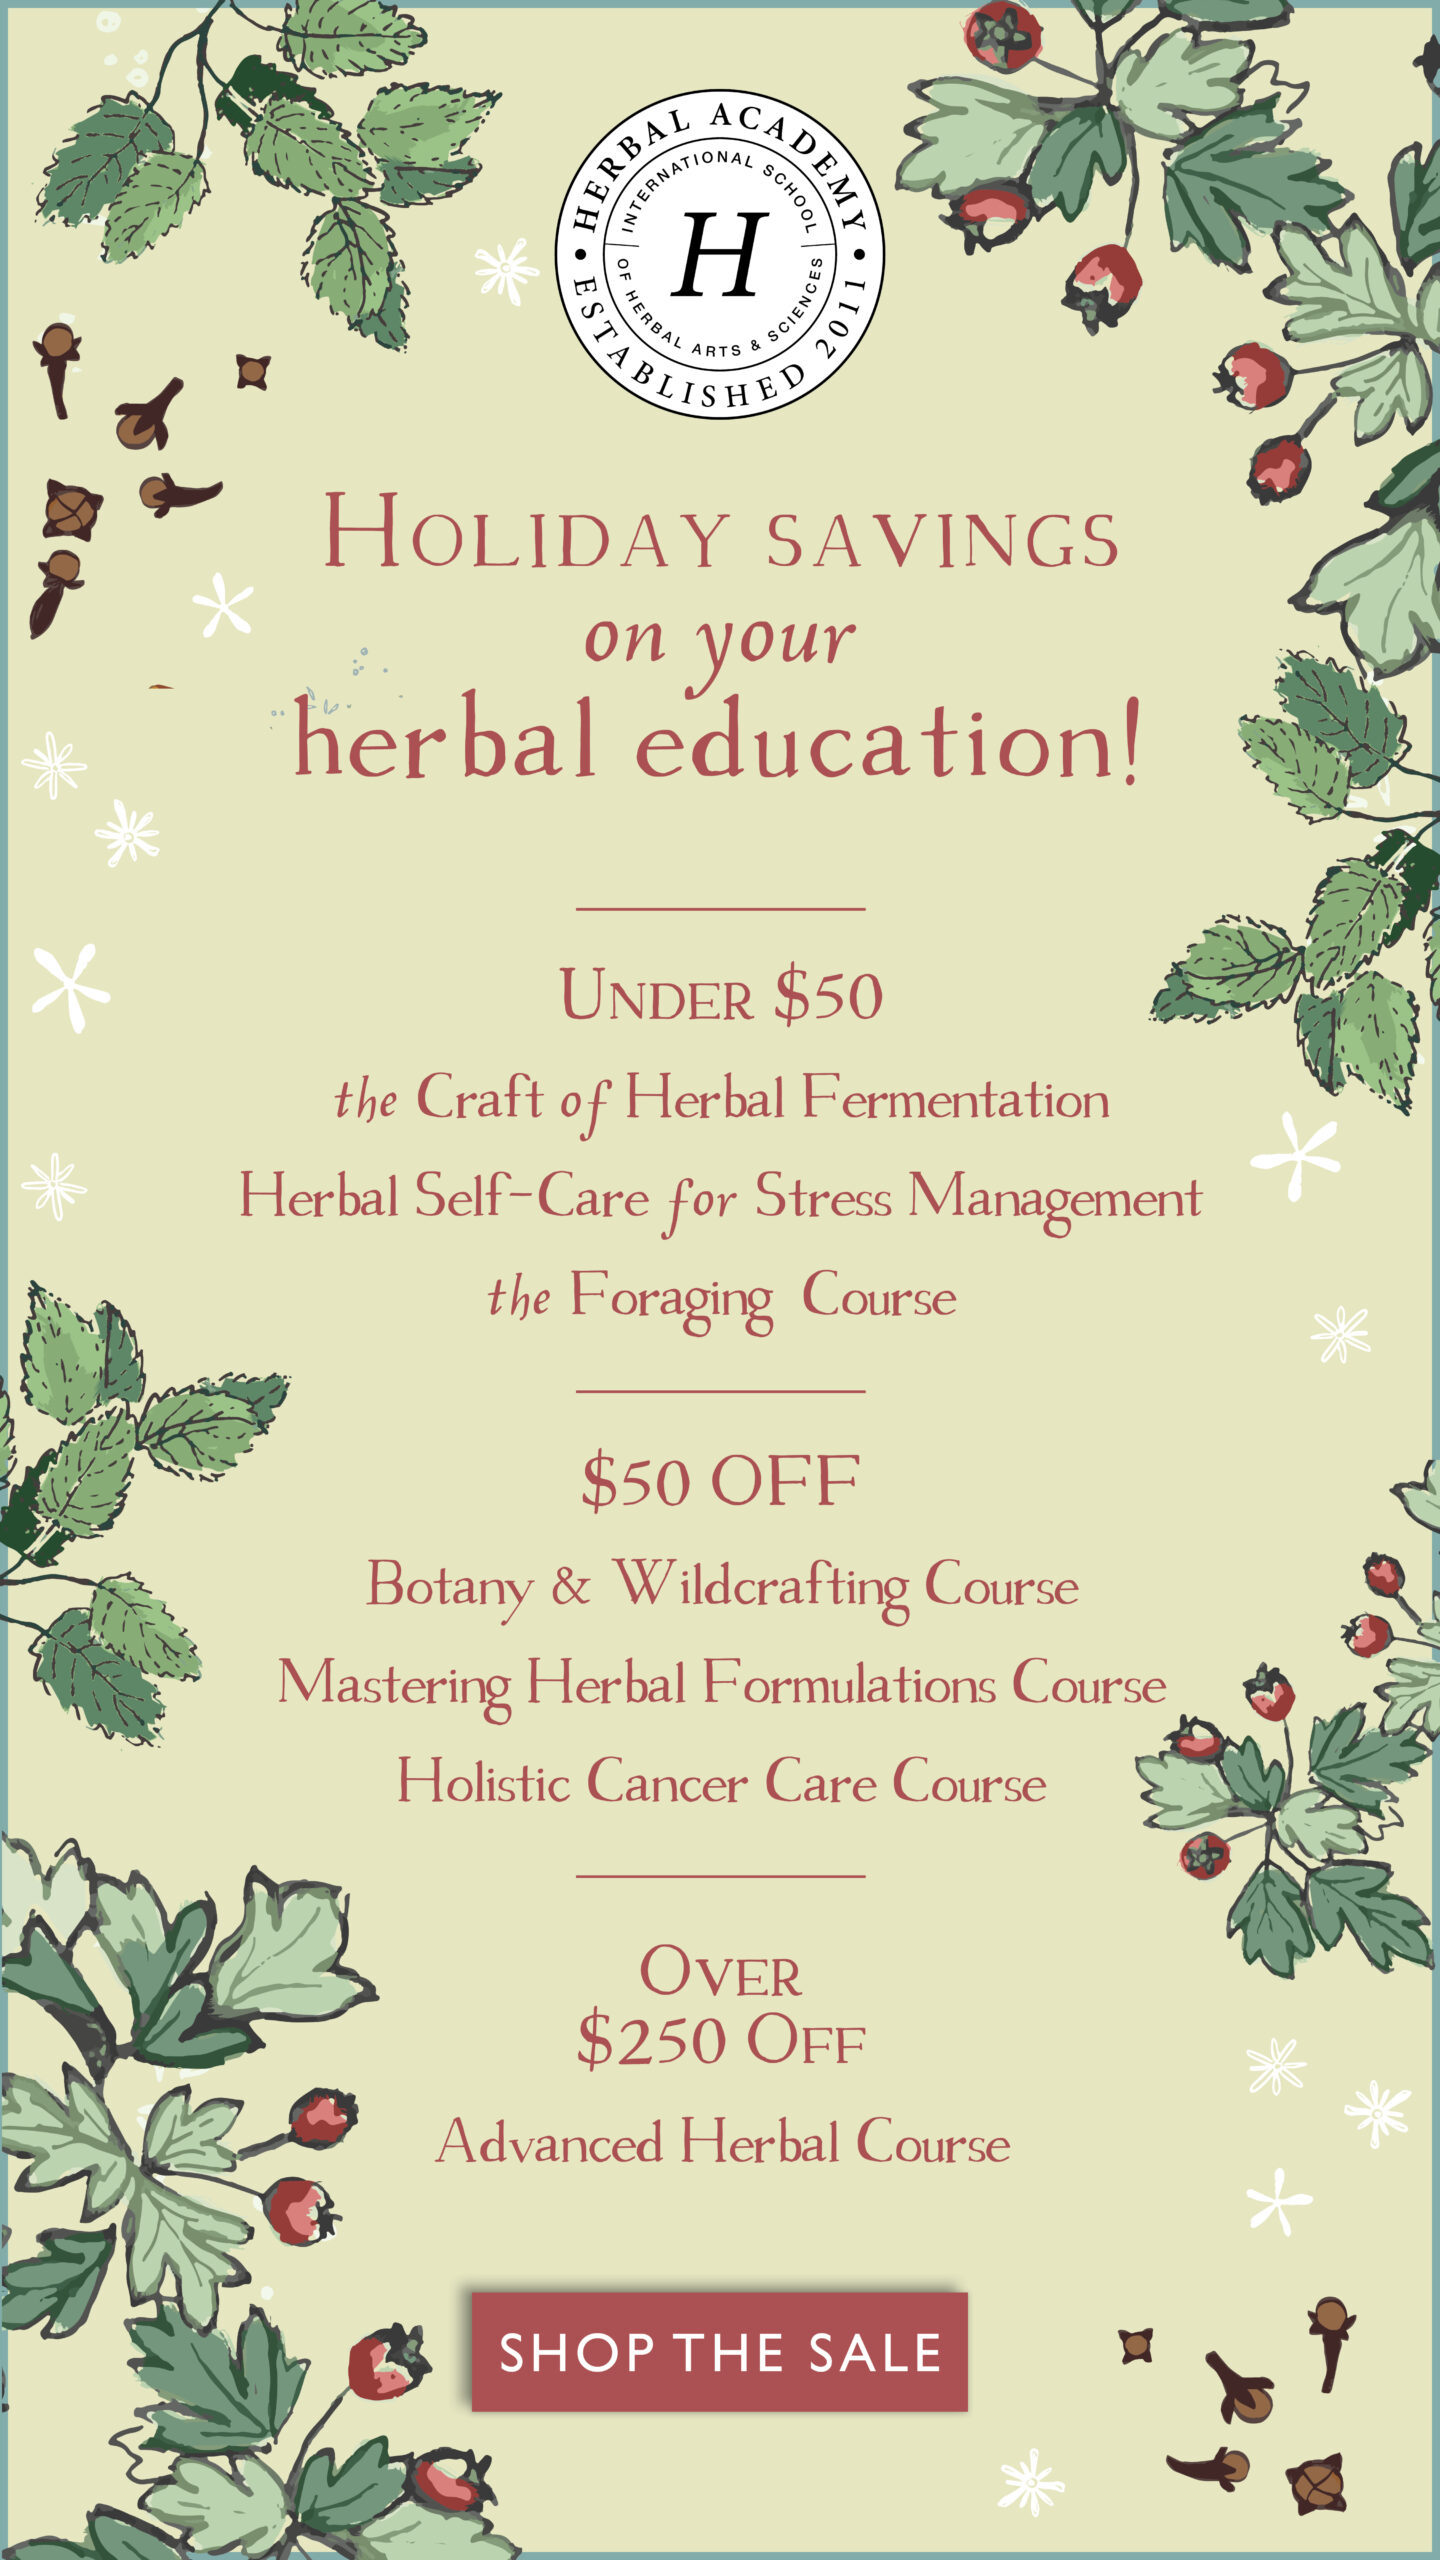 Holiday Savings on your Herbal Education!